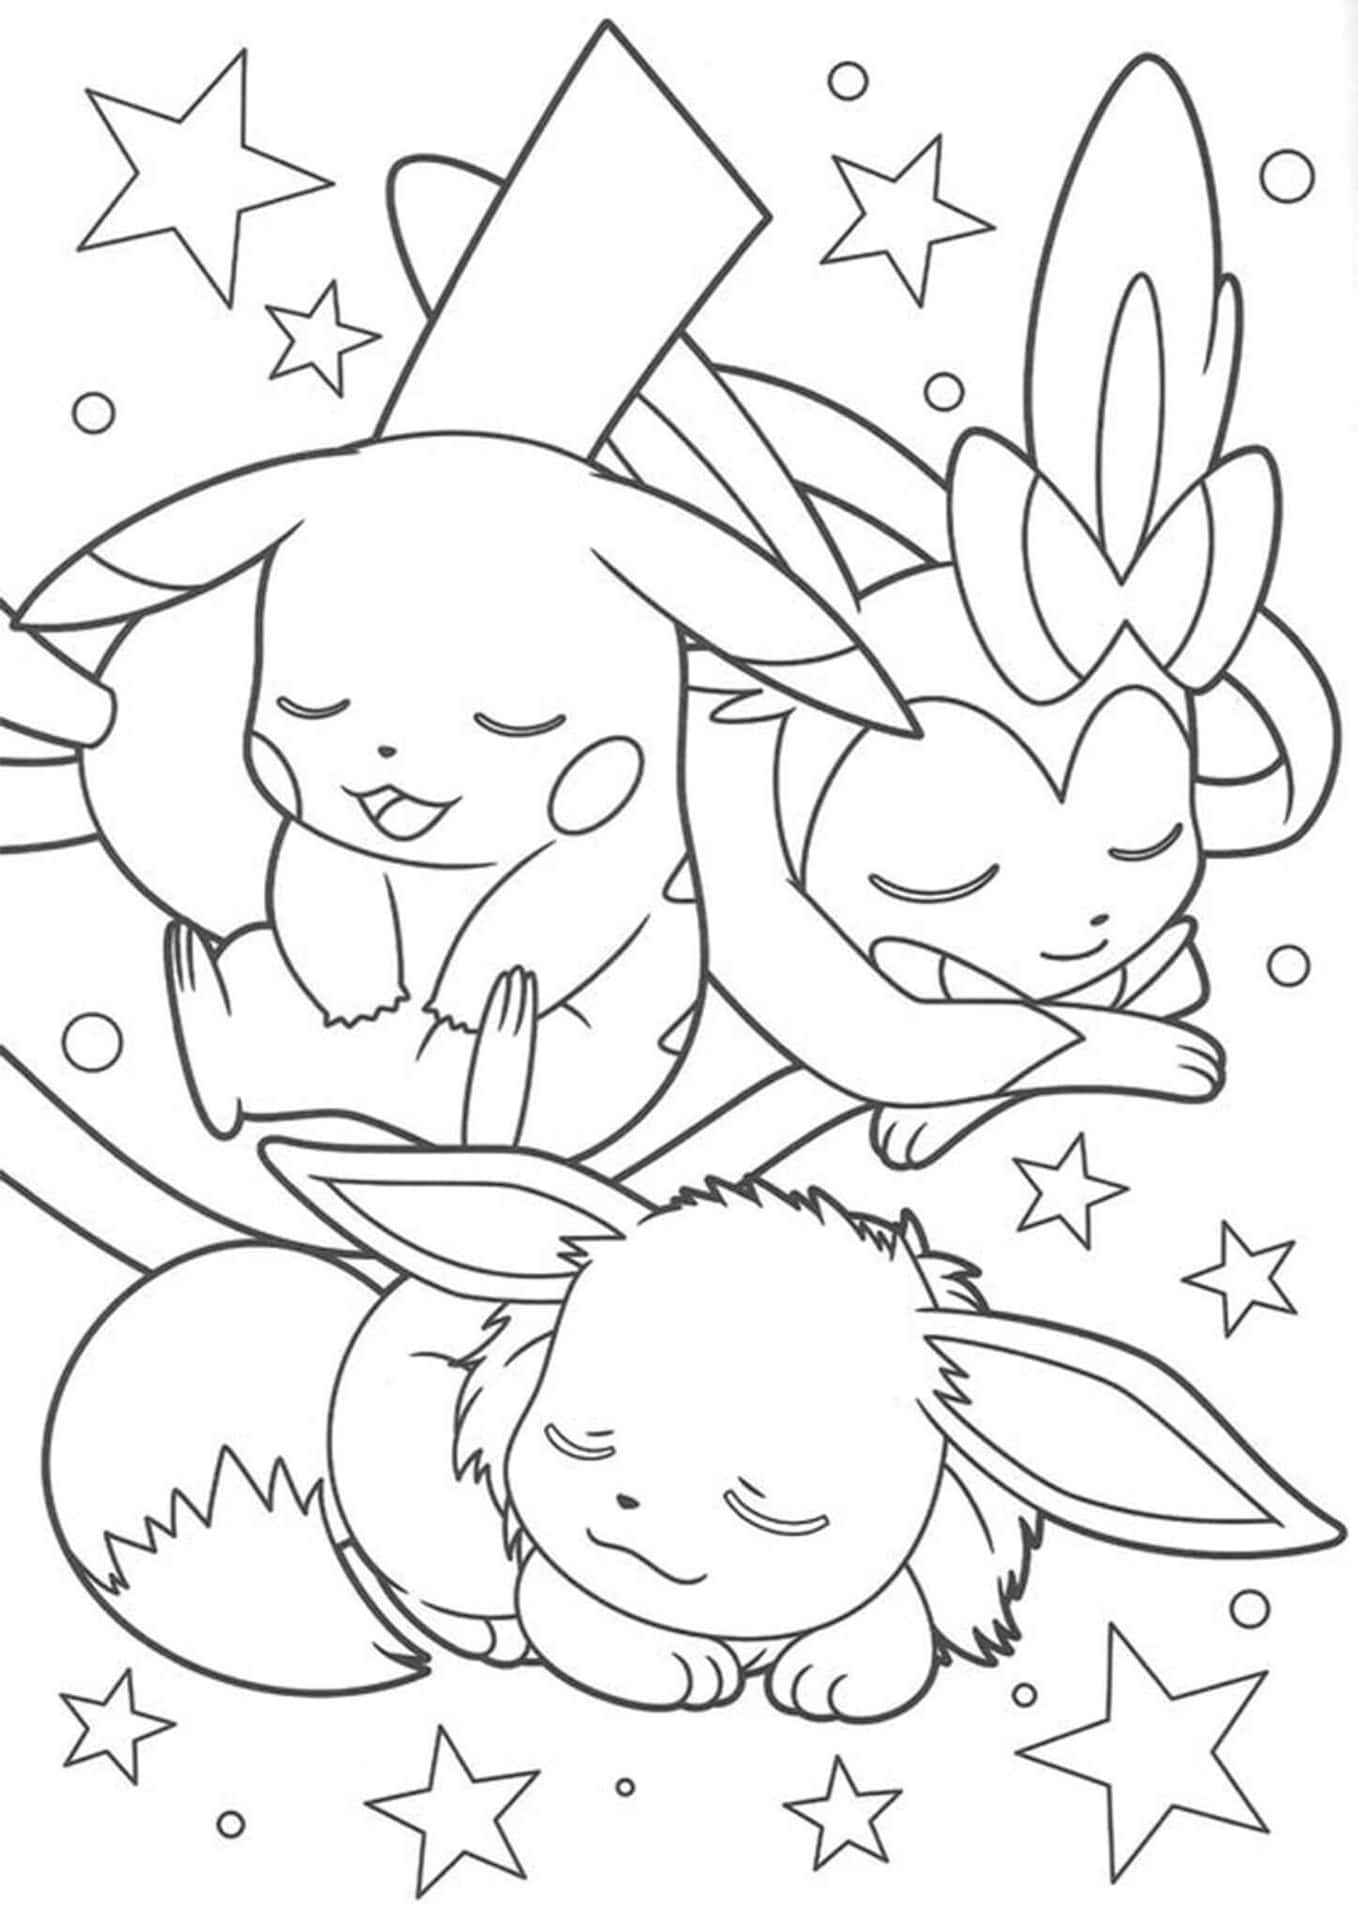 Download Pokemon Coloring Pages For Kids | Wallpapers.com